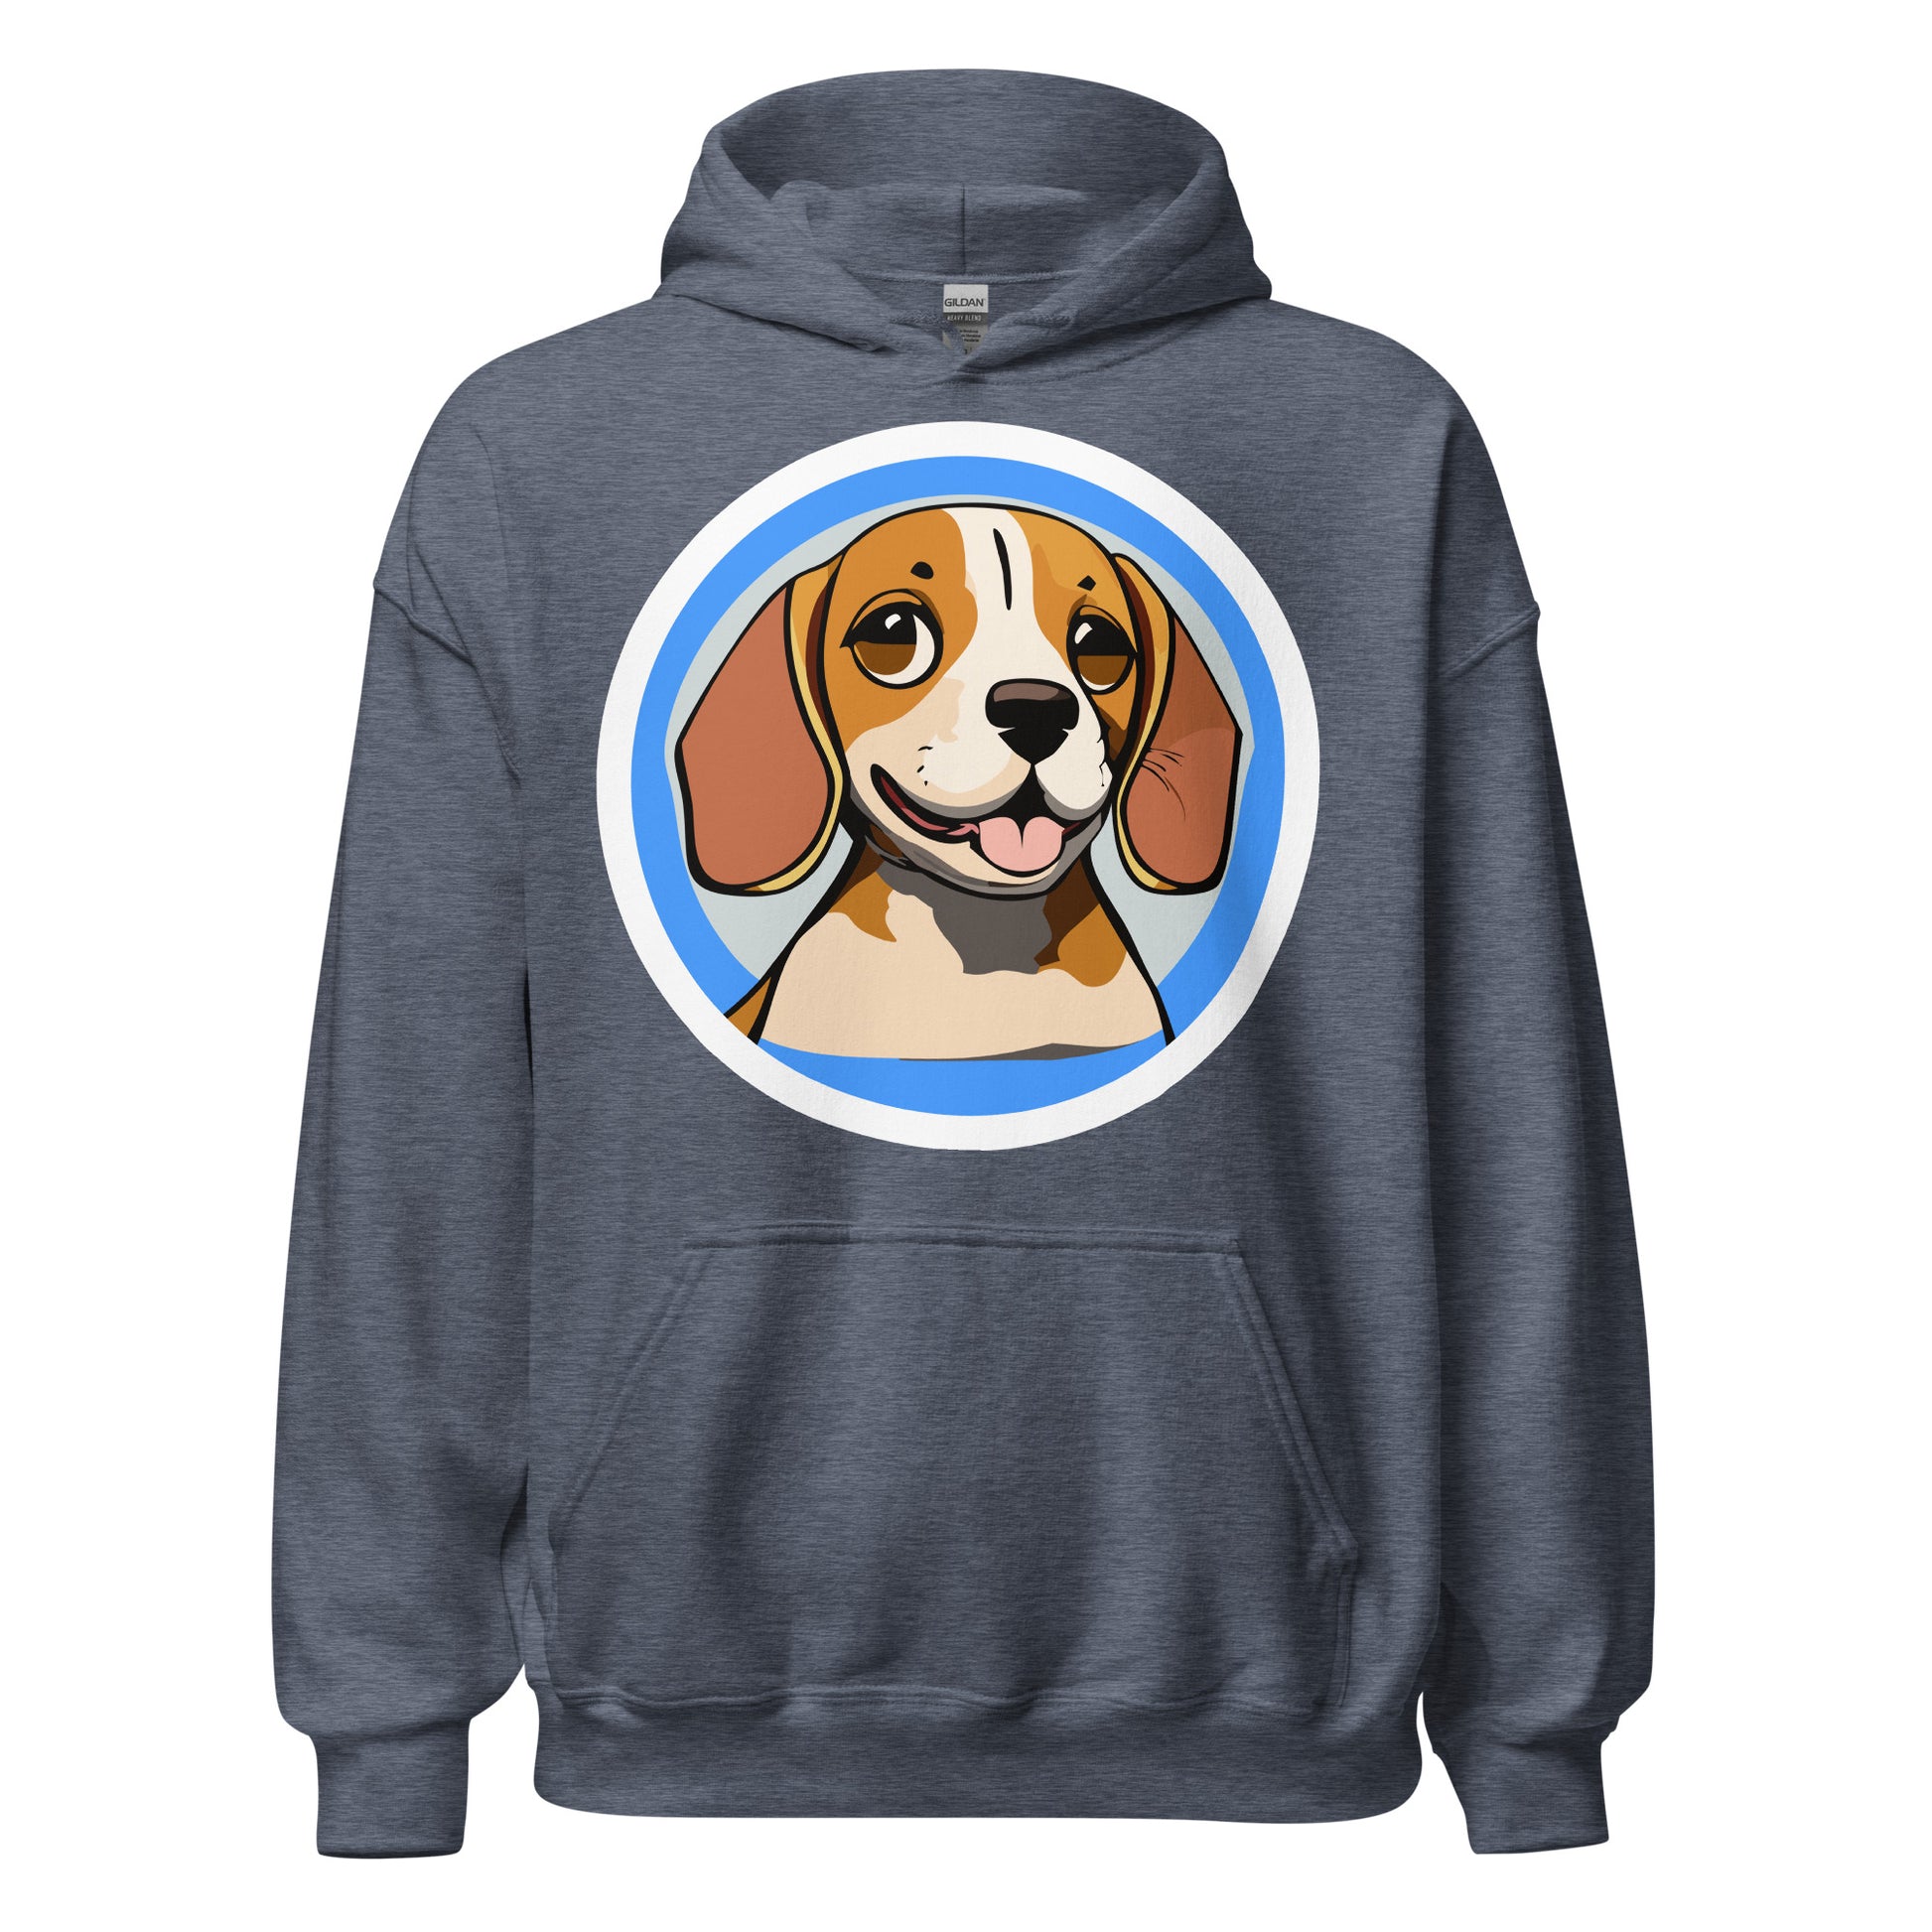 Comfy unisex hoodie for him or her with a cute beagle image